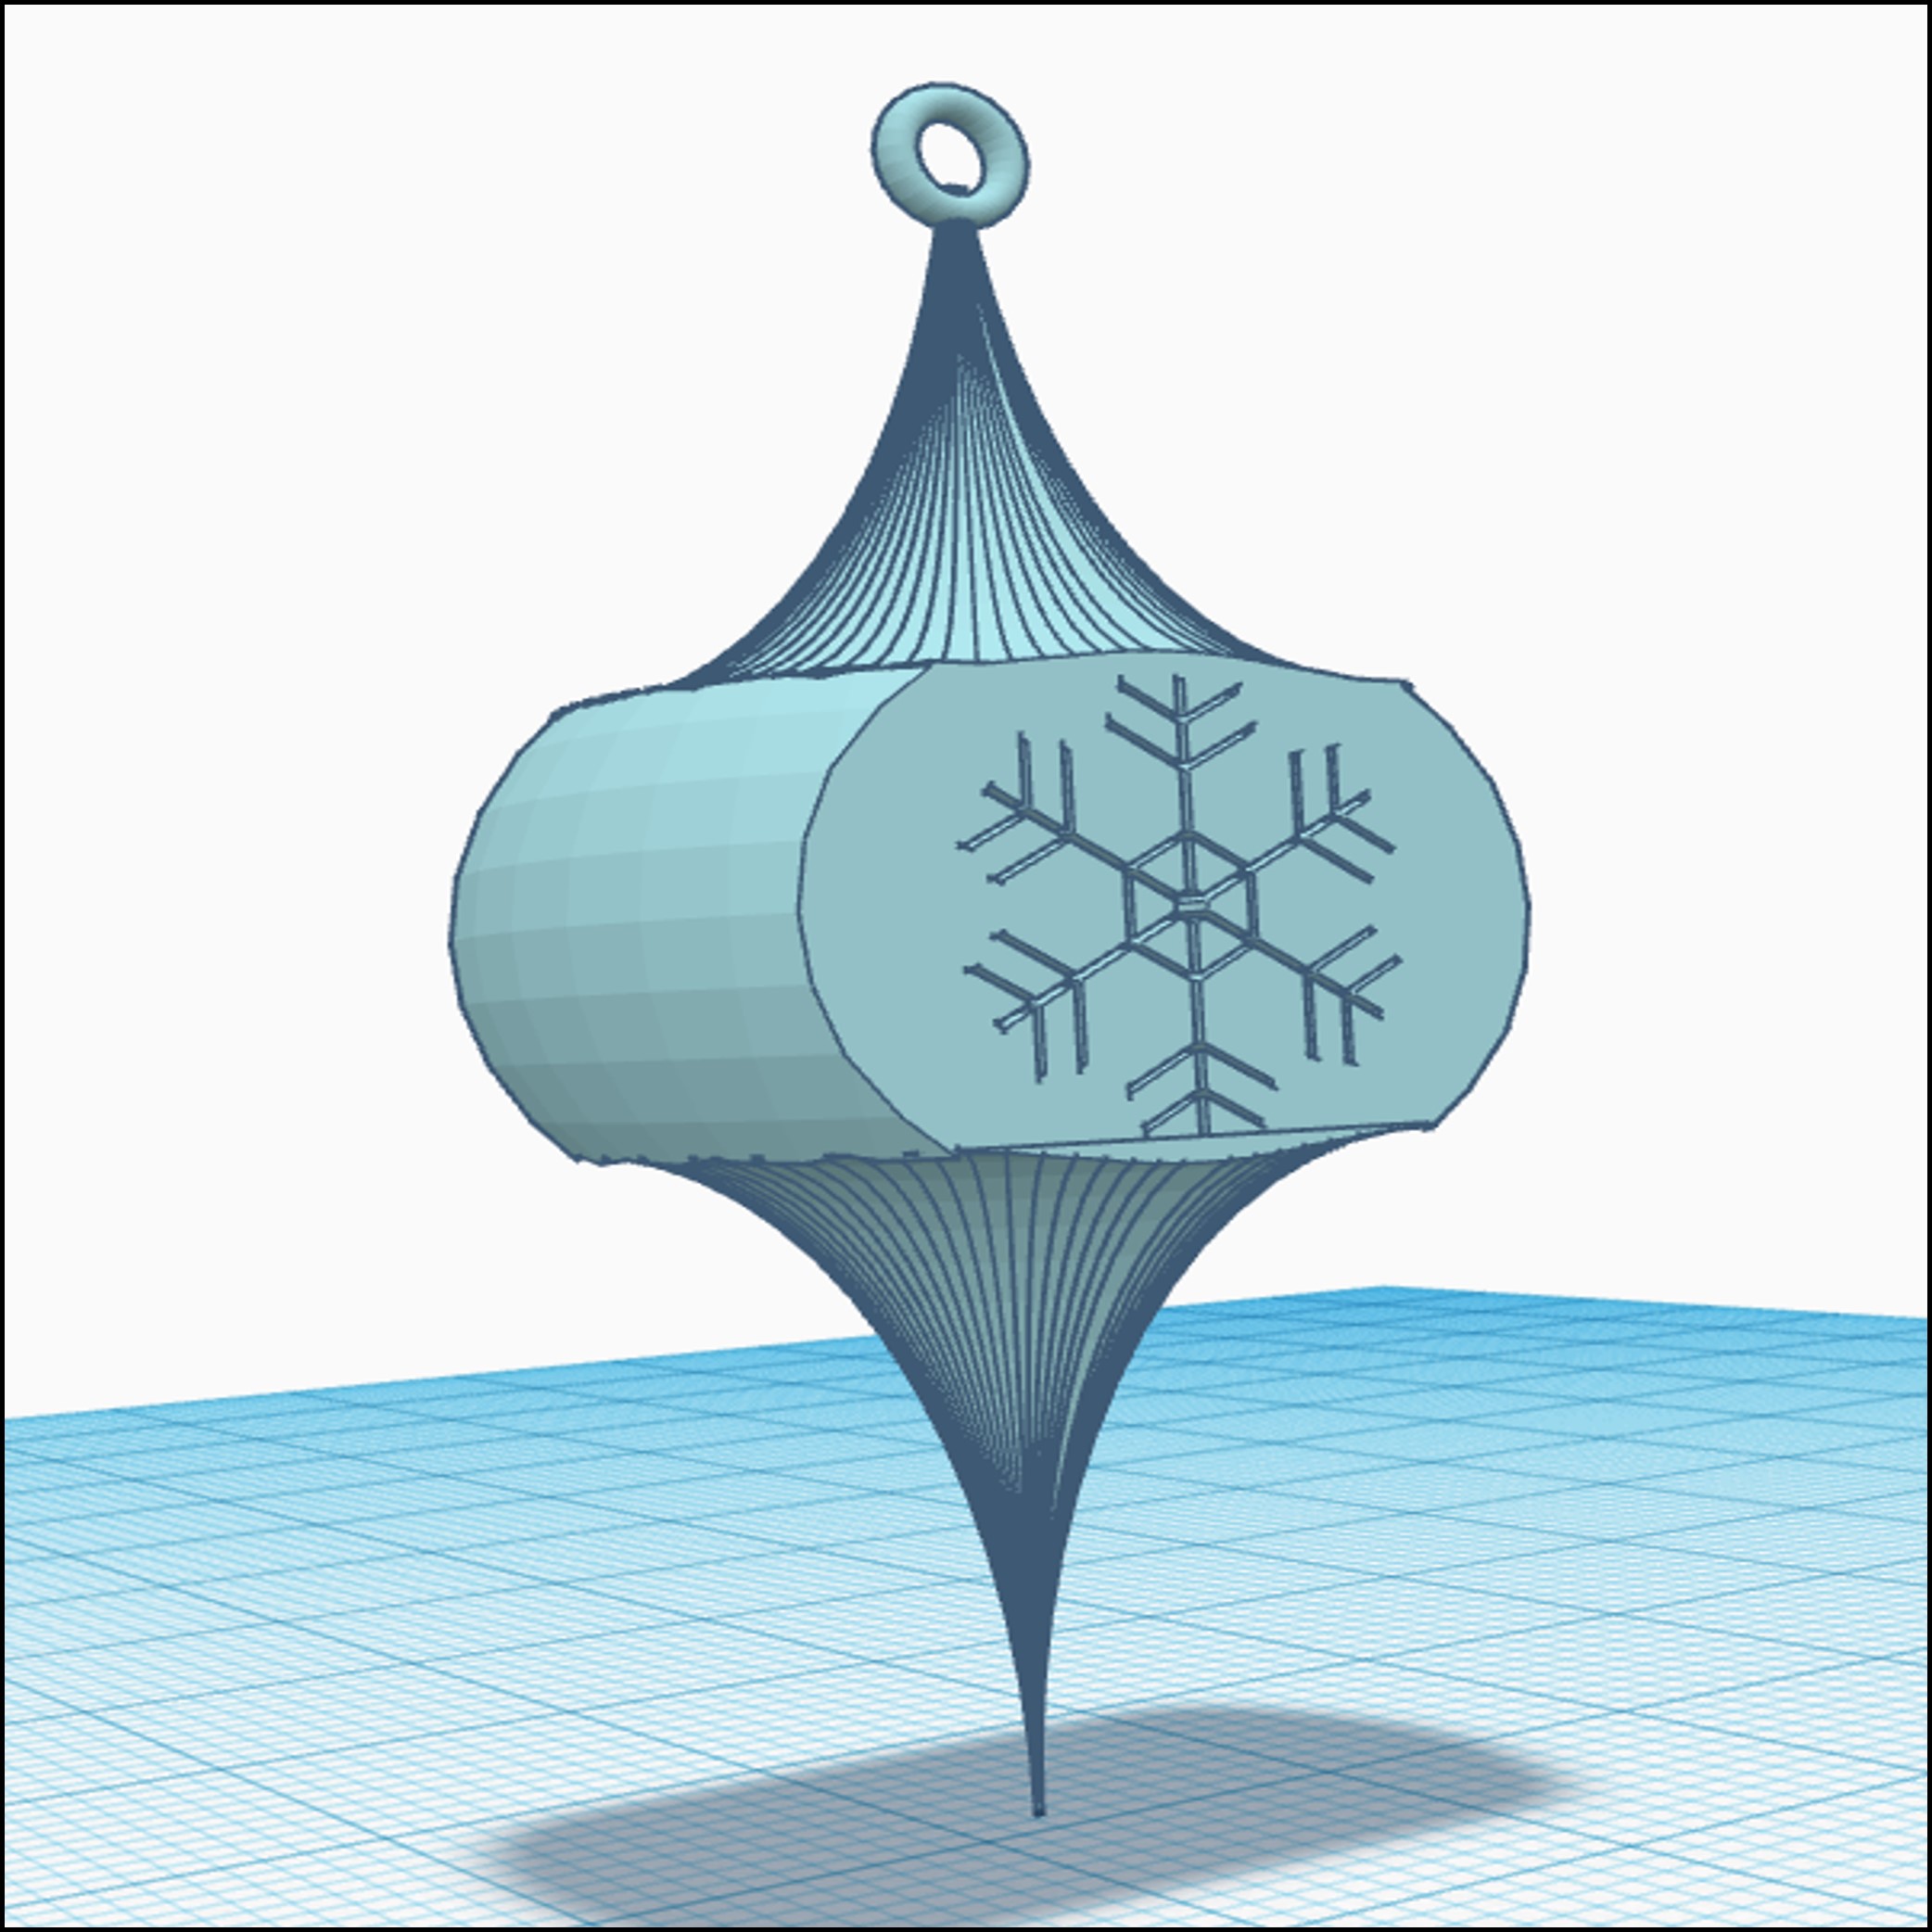 An elongated bauble design with snowflake patterning